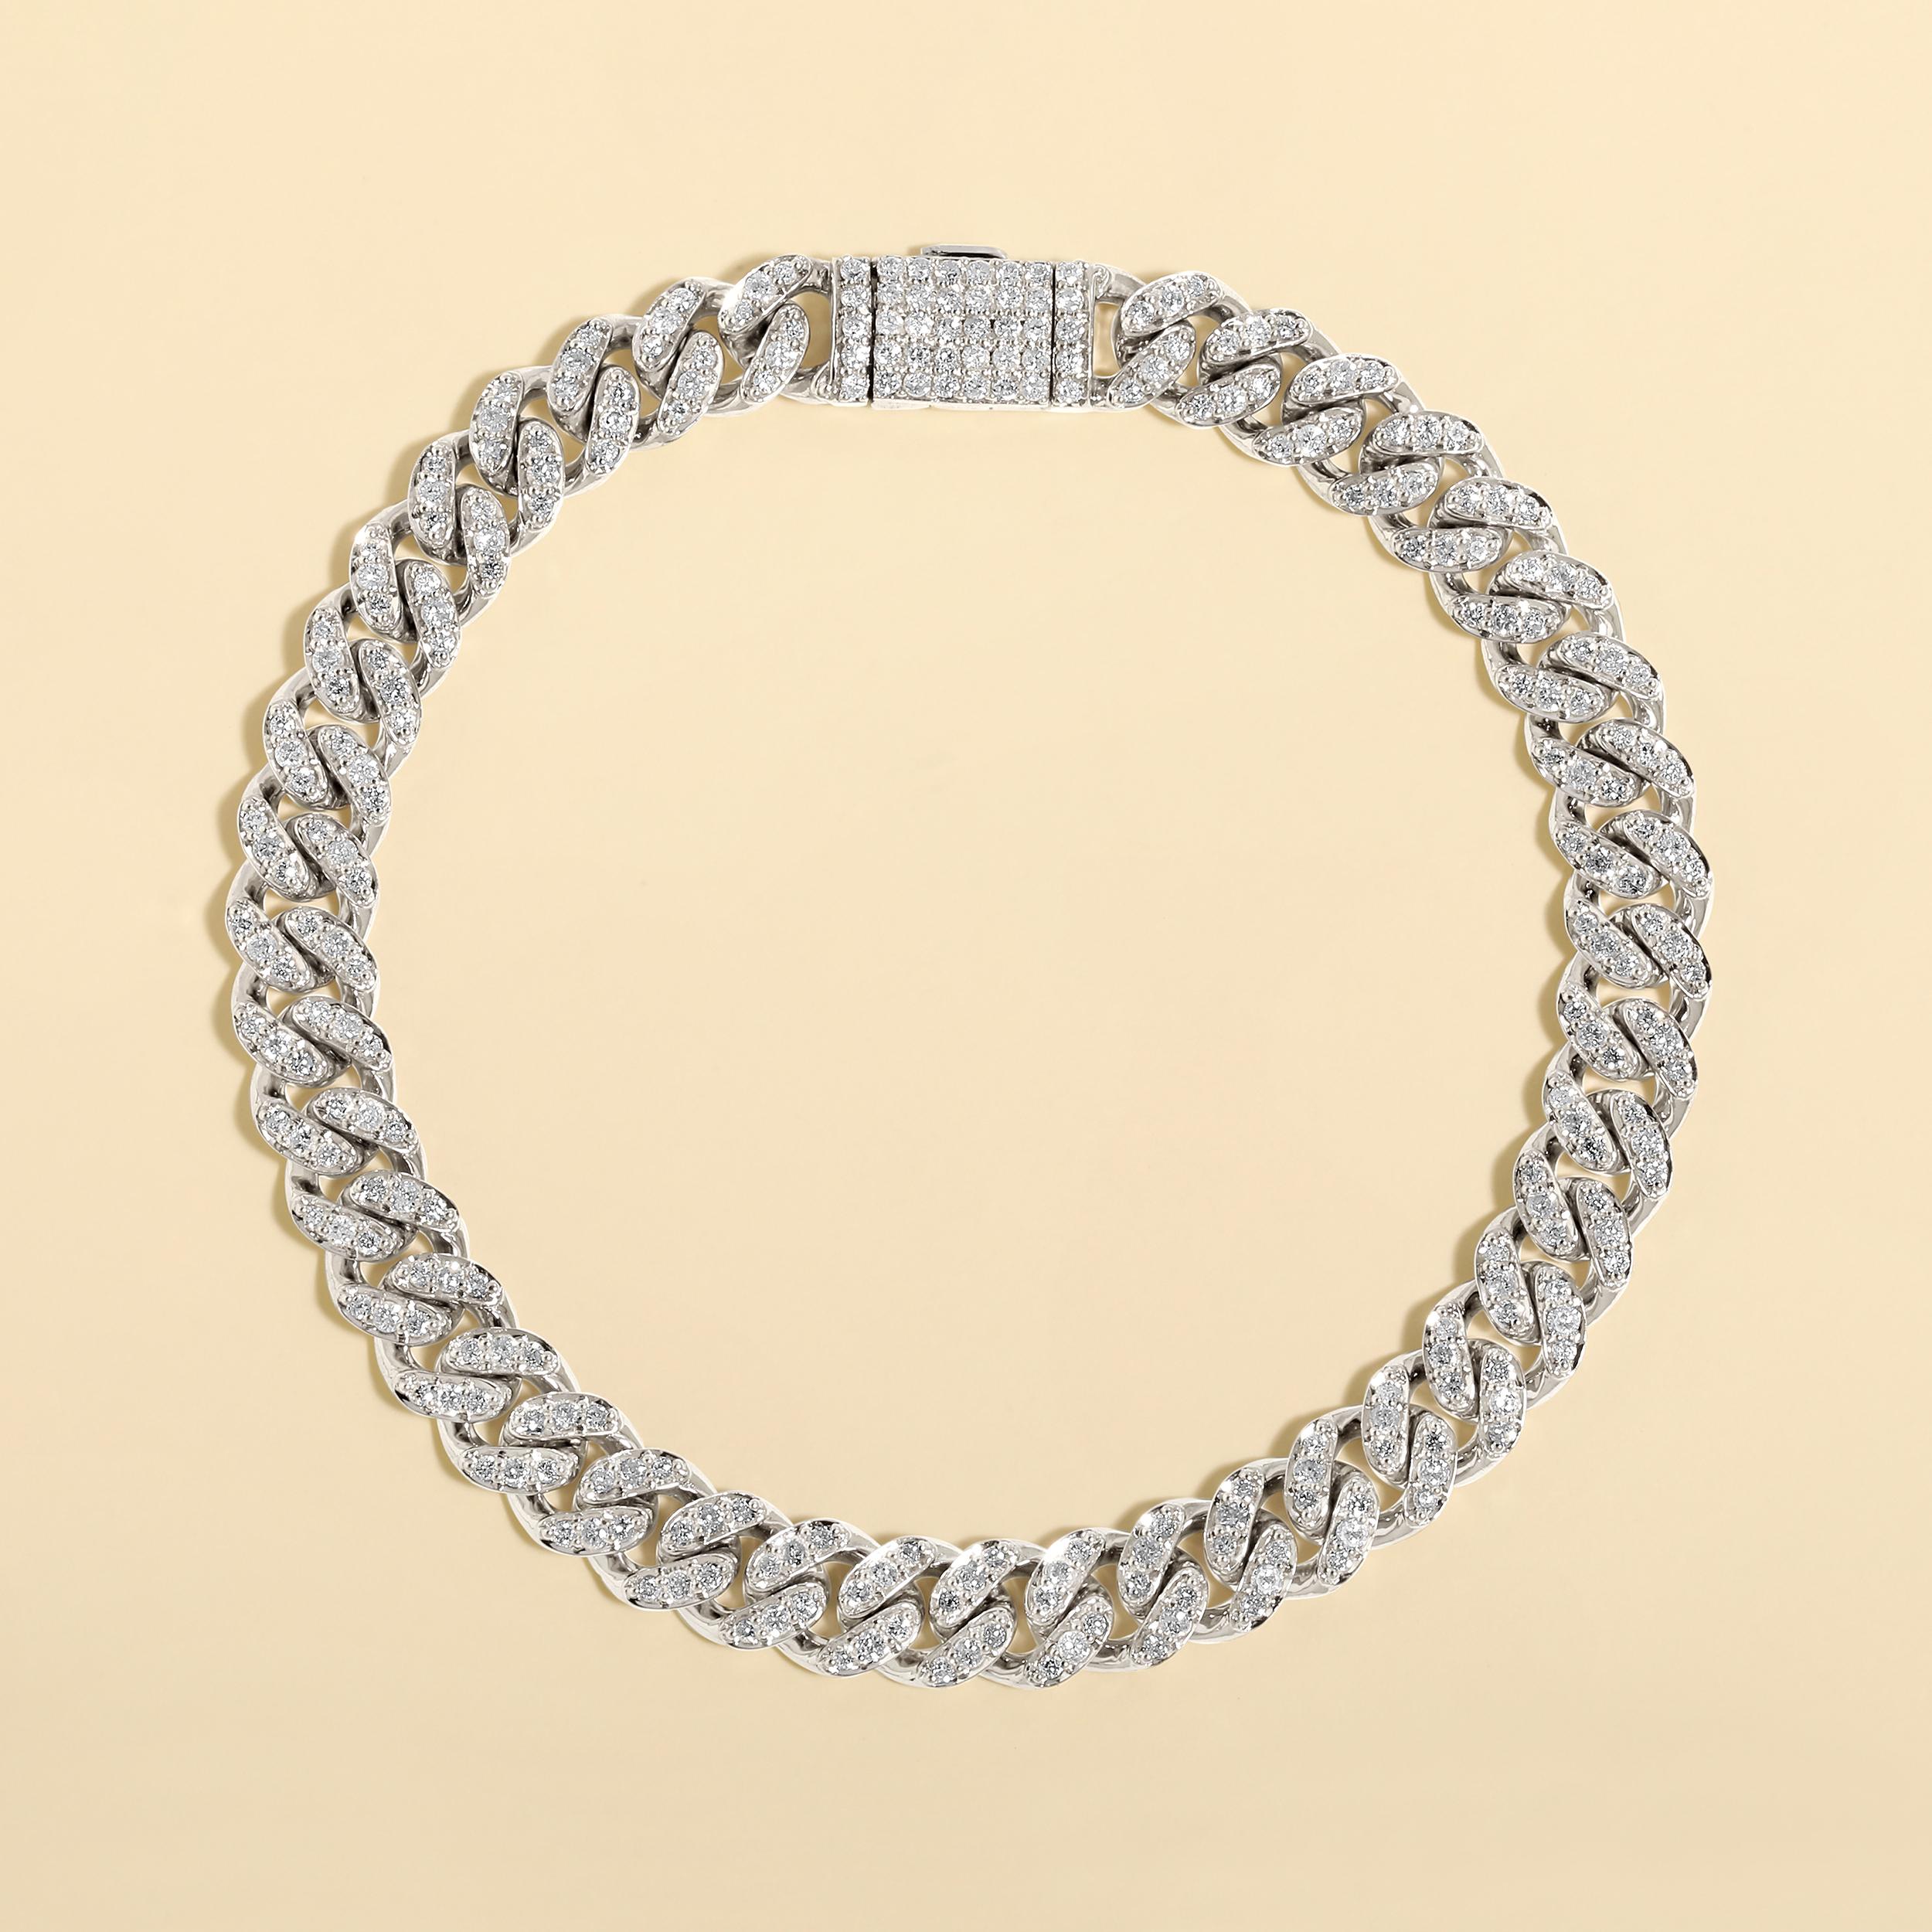 Crafted in 18.08 grams of 10K White Gold, the bracelet contains 286 stones of Round Natural Diamonds with a total of 2.4 carat in F-G color and I1-I2 clarity. The bracelet length is 7.5 inches.

CONTEMPORARY AND TIMELESS ESSENCE: Crafted in